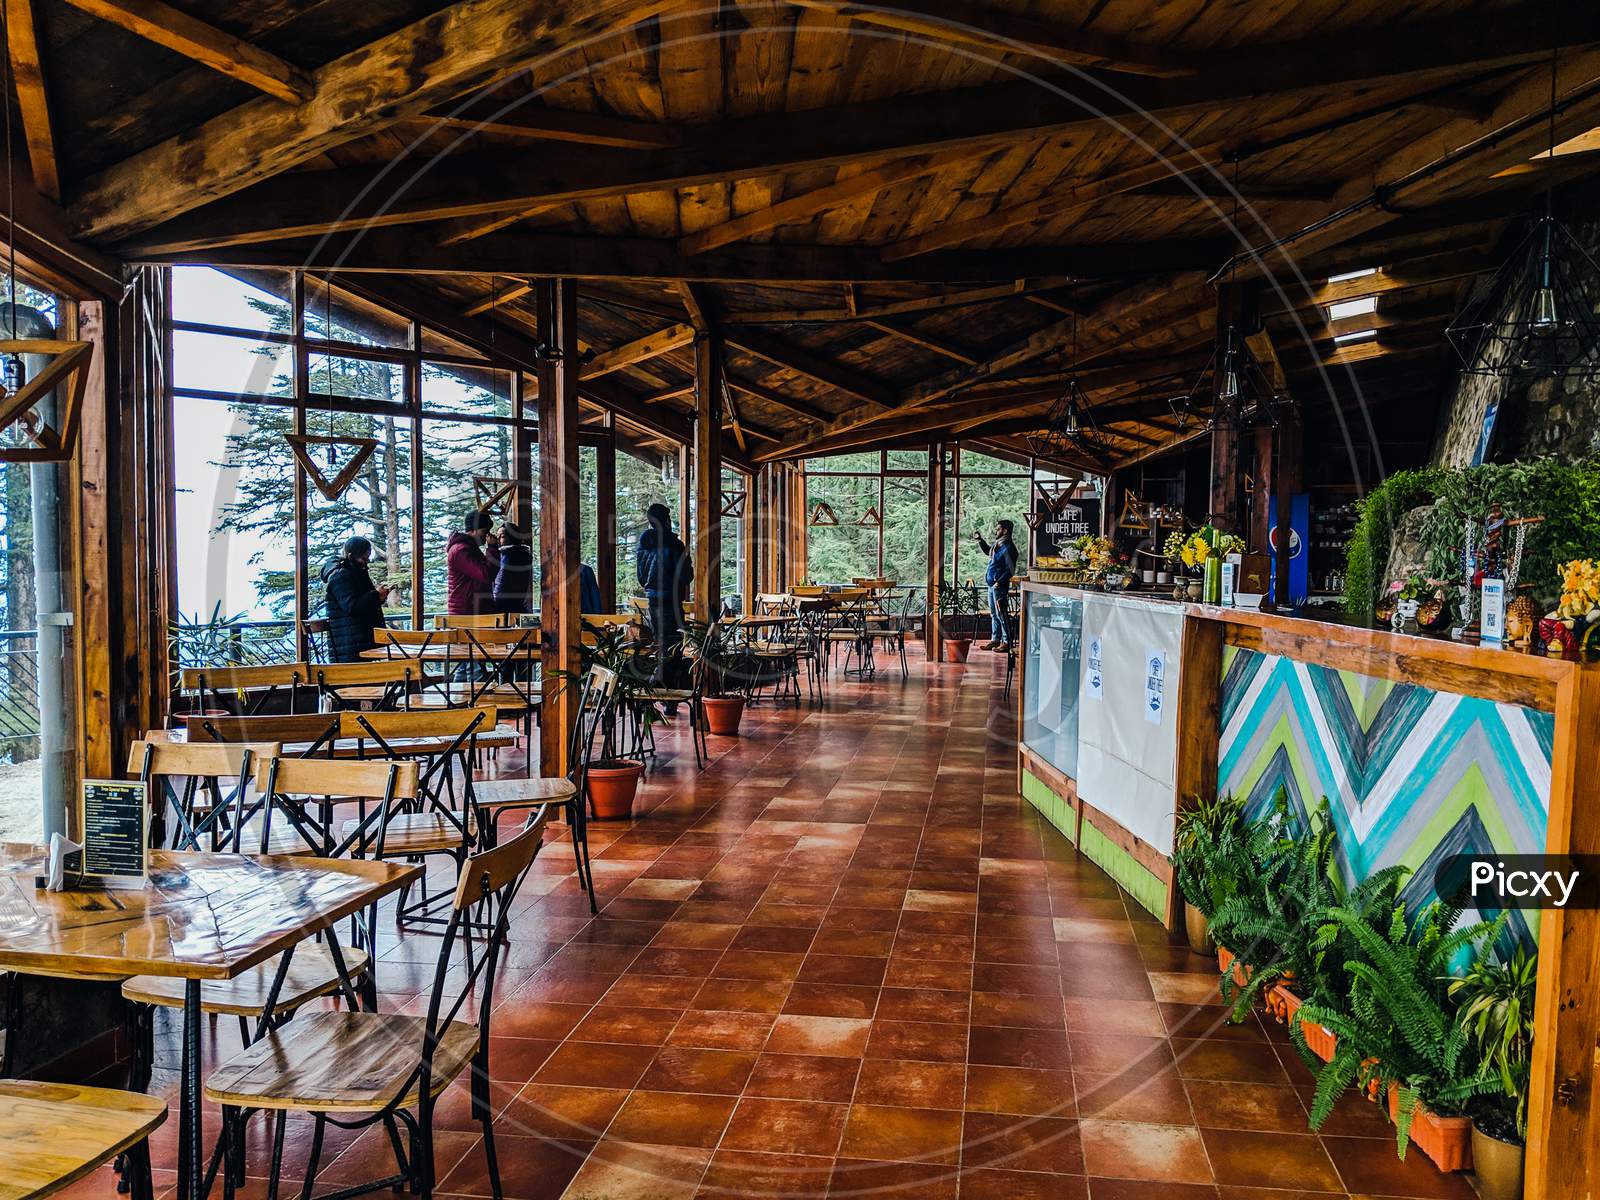 Shimla, Himachal Pradesh,India-January 2019:Cafe  in dark forest , Highest cafe in Shimla,Hill station in Himachala pradesh, empty table chairs on floor, room covered with glass surrounded by trees